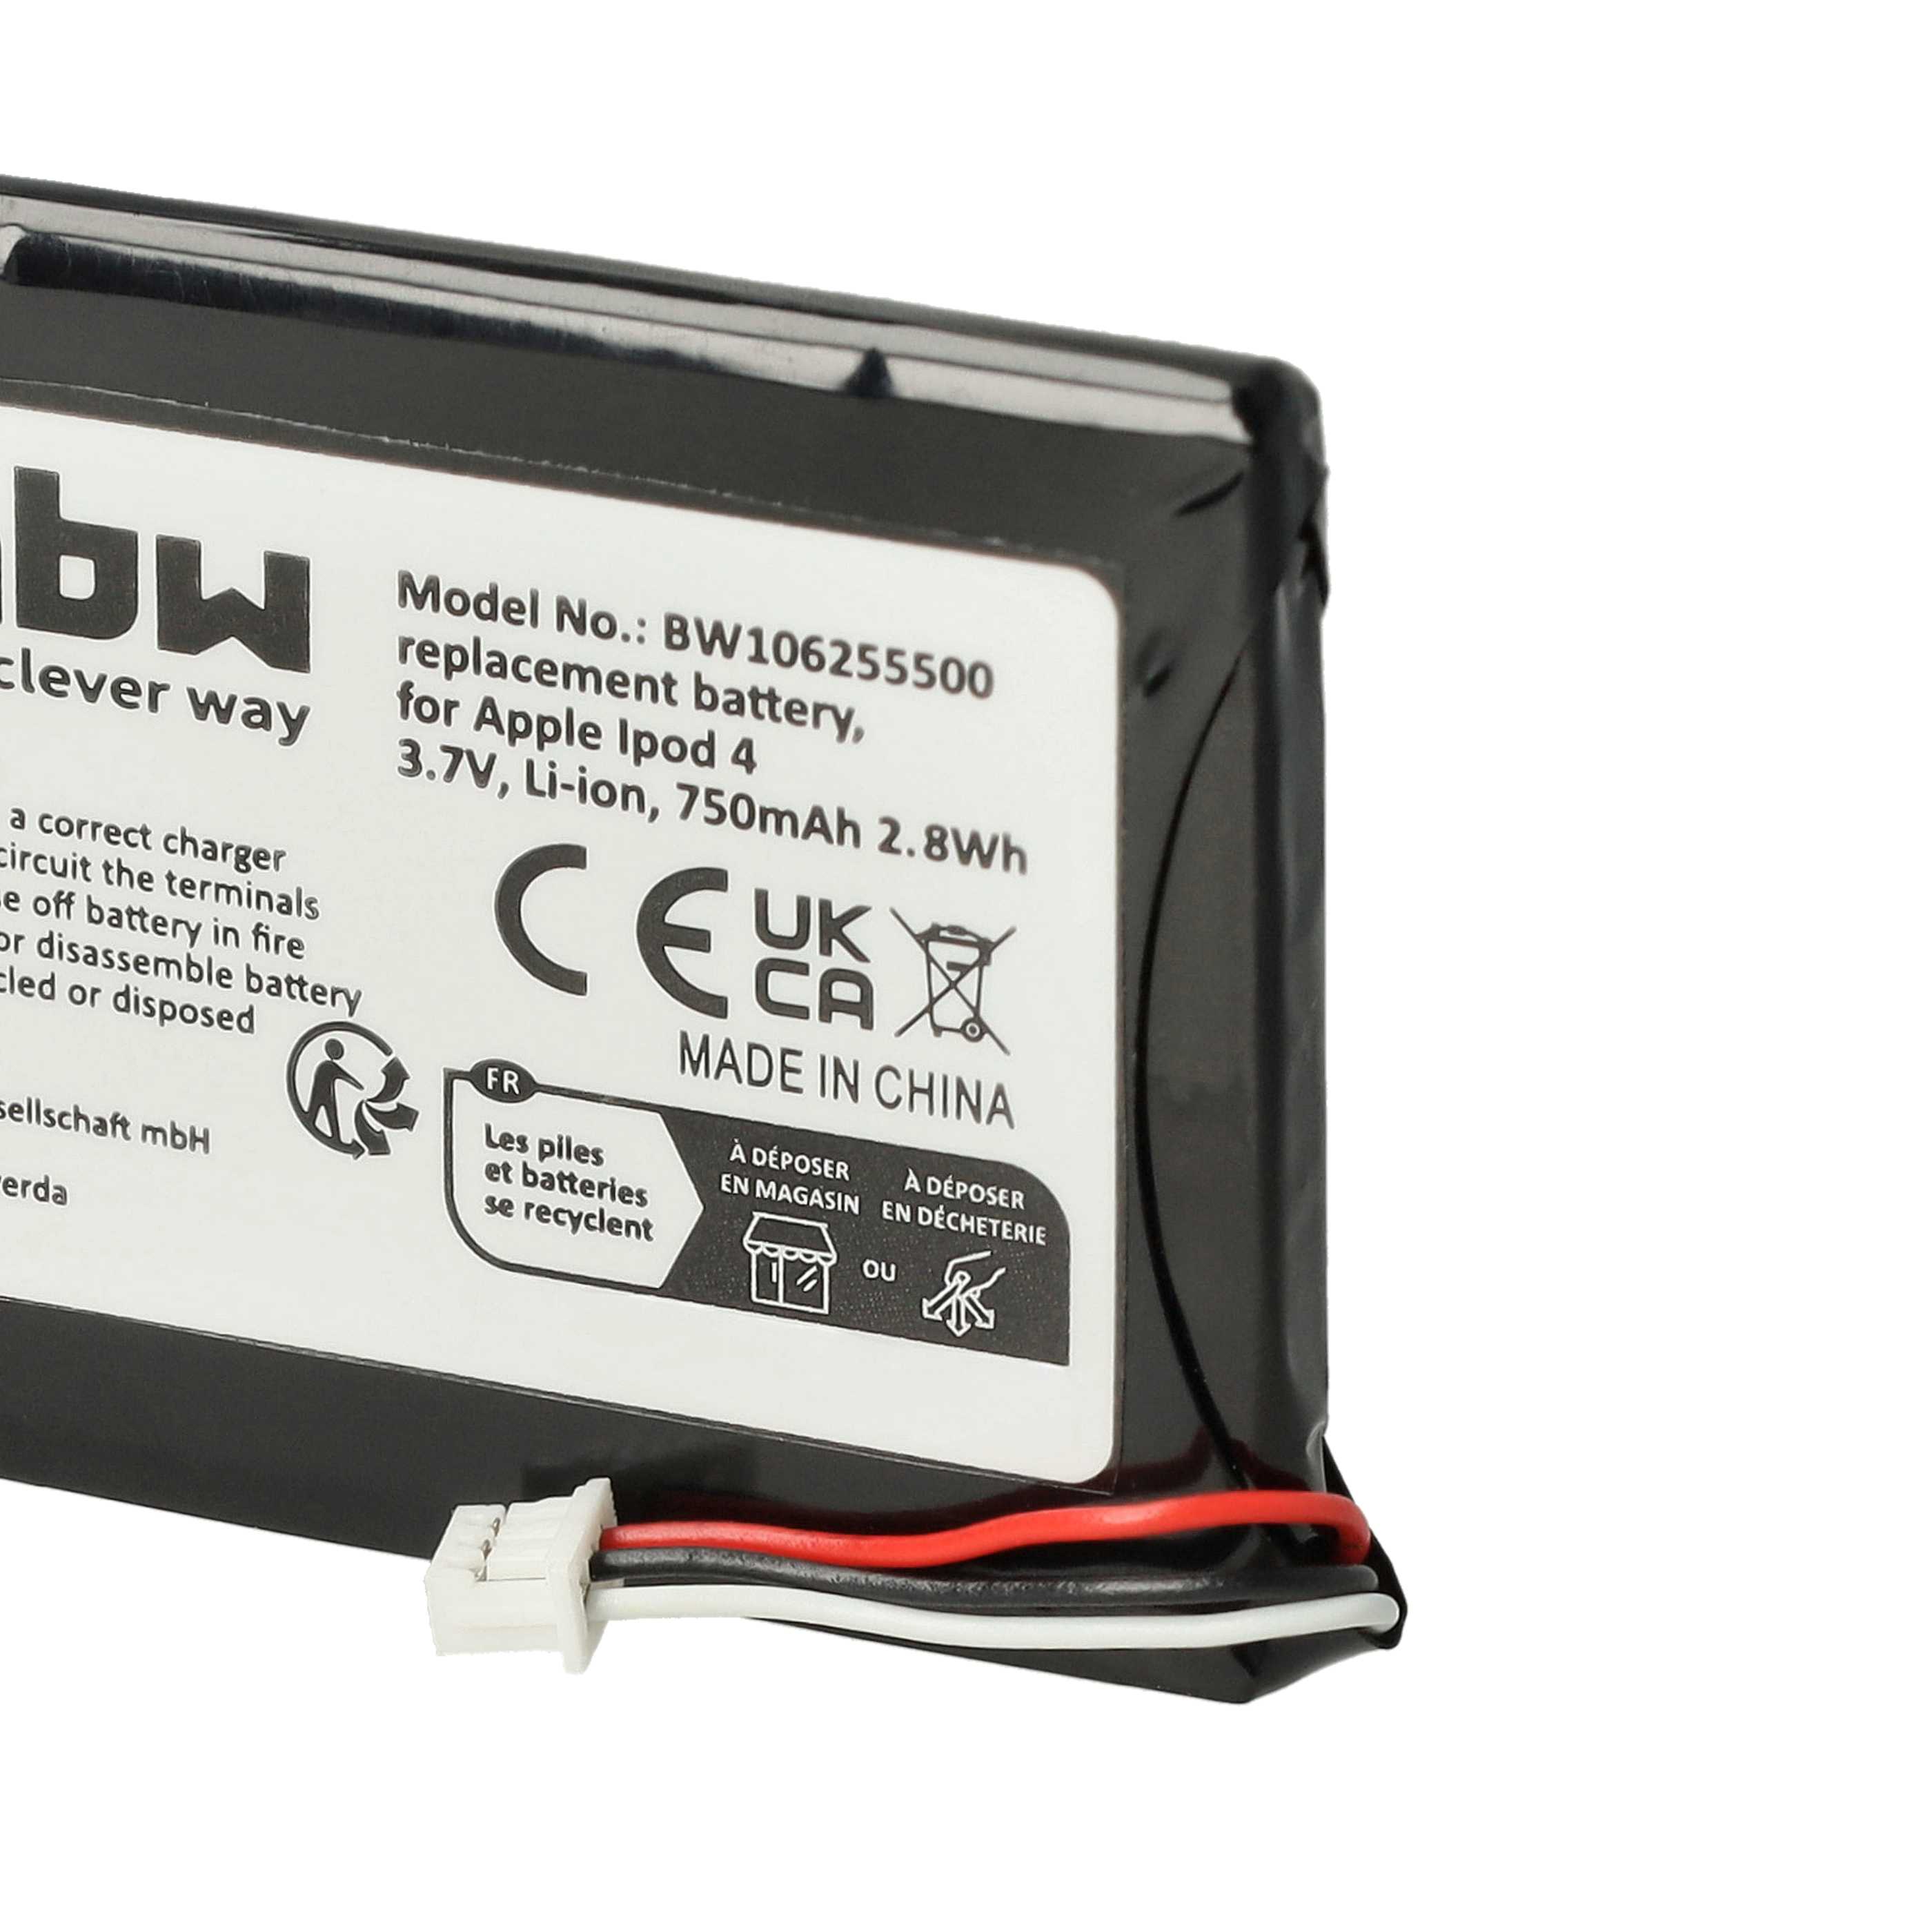 MP3-Player Battery Replacement for Apple 616-0206, 616-0215, 616-0198, 616-0183 - 750mAh 3.7V Li-Ion